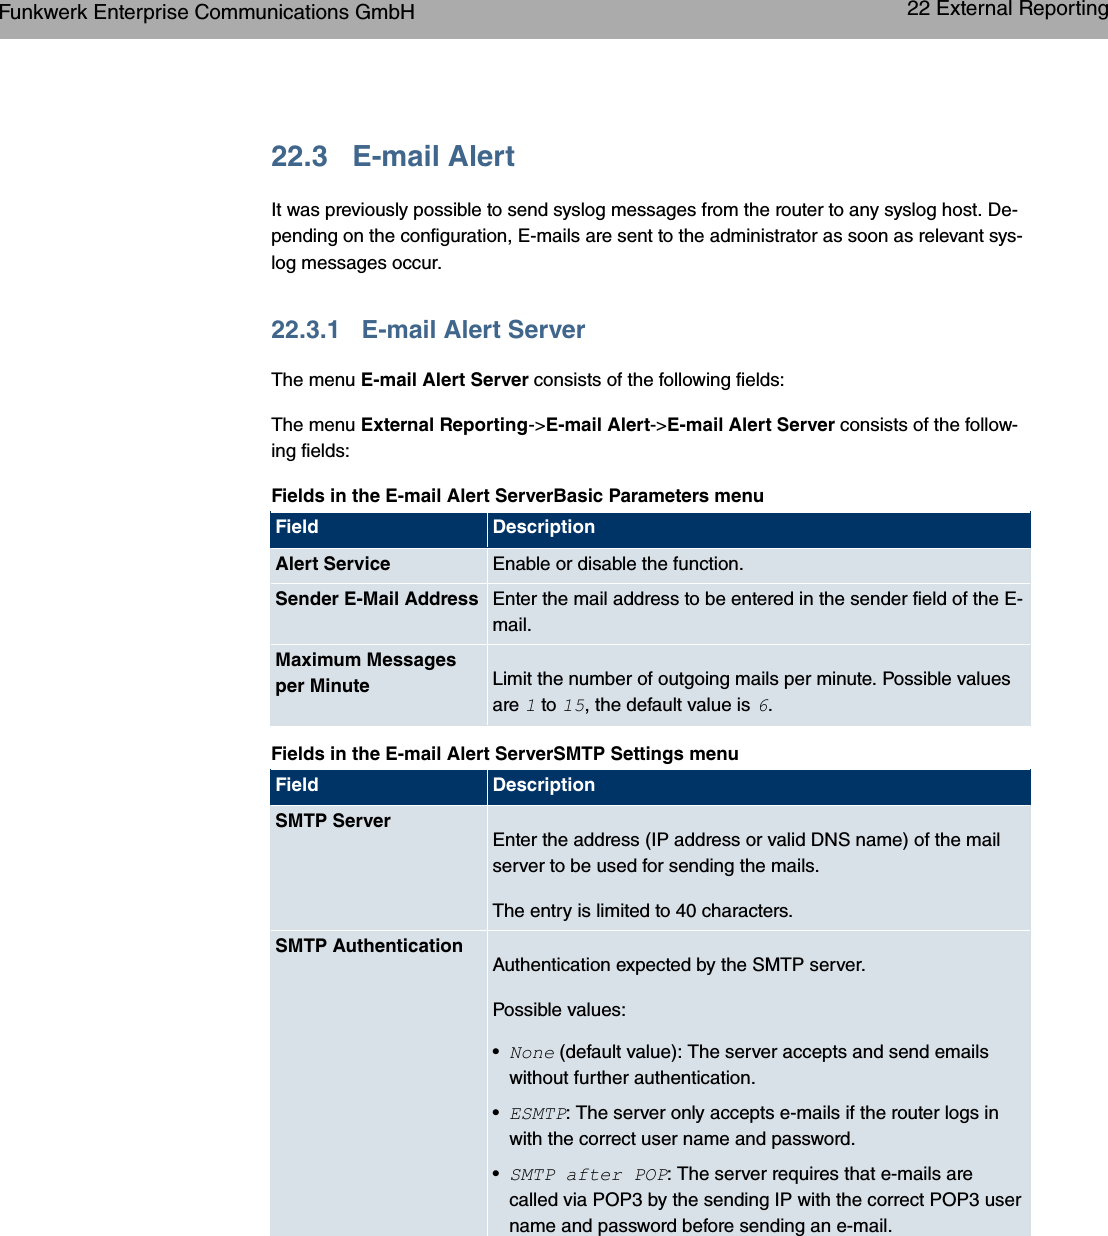 22.3 E-mail AlertIt was previously possible to send syslog messages from the router to any syslog host. De-pending on the configuration, E-mails are sent to the administrator as soon as relevant sys-log messages occur.22.3.1 E-mail Alert ServerThe menu E-mail Alert Server consists of the following fields:The menu External Reporting-&gt;E-mail Alert-&gt;E-mail Alert Server consists of the follow-ing fields:Fields in the E-mail Alert ServerBasic Parameters menuField DescriptionAlert Service Enable or disable the function.Sender E-Mail Address Enter the mail address to be entered in the sender field of the E-mail.Maximum Messagesper Minute Limit the number of outgoing mails per minute. Possible valuesare to , the default value is .Fields in the E-mail Alert ServerSMTP Settings menuField DescriptionSMTP ServerEnter the address (IP address or valid DNS name) of the mailserver to be used for sending the mails.The entry is limited to 40 characters.SMTP AuthenticationAuthentication expected by the SMTP server.Possible values:•2 (default value): The server accepts and send emailswithout further authentication.•*=4: The server only accepts e-mails if the router logs inwith the correct user name and password.•=4 &quot; ;: The server requires that e-mails arecalled via POP3 by the sending IP with the correct POP3 username and password before sending an e-mail.Funkwerk Enterprise Communications GmbH 22 External Reportingbintec WLAN and Industrial WLAN 325